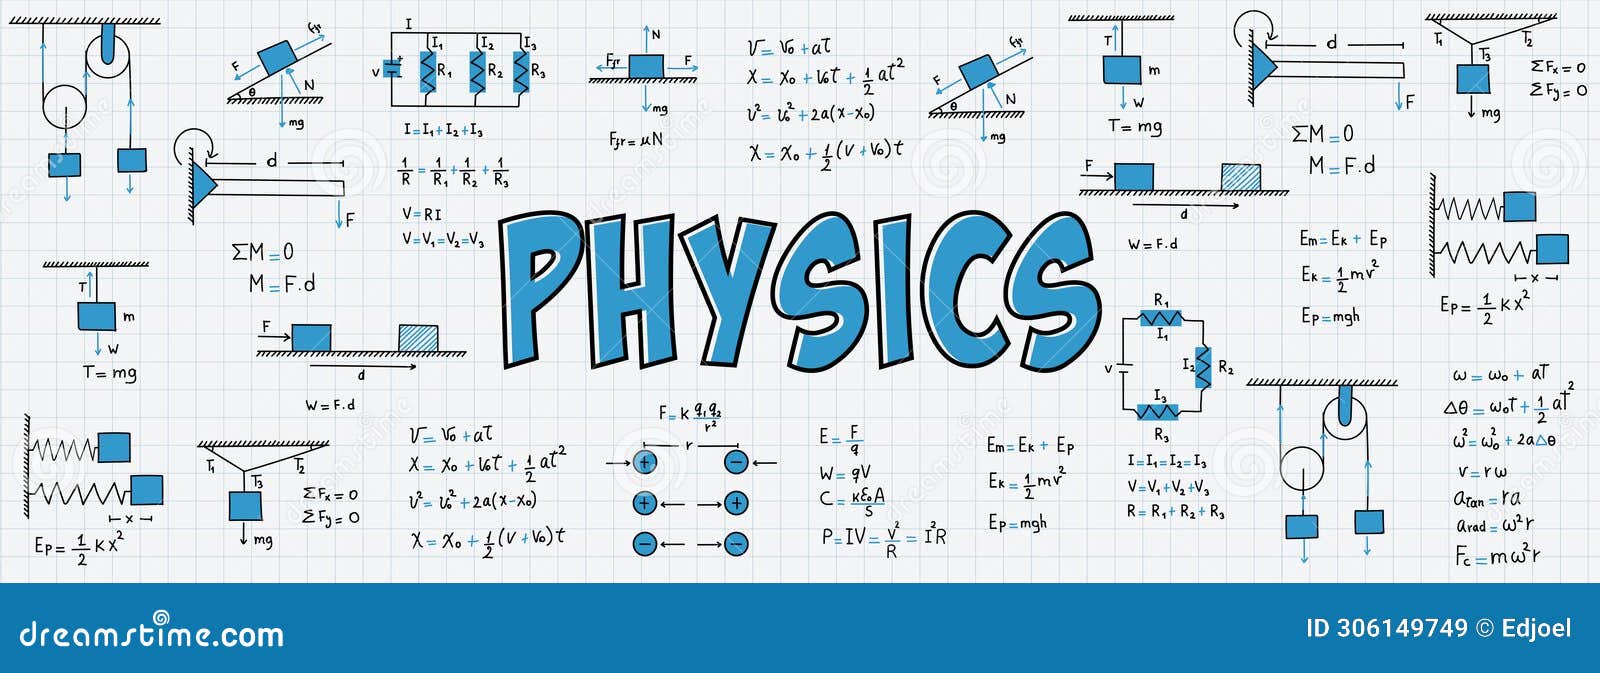 notes on exercises, formulas and equations of physics, uniform rectilinear motion, statics, electromagnetism, electrical circuits